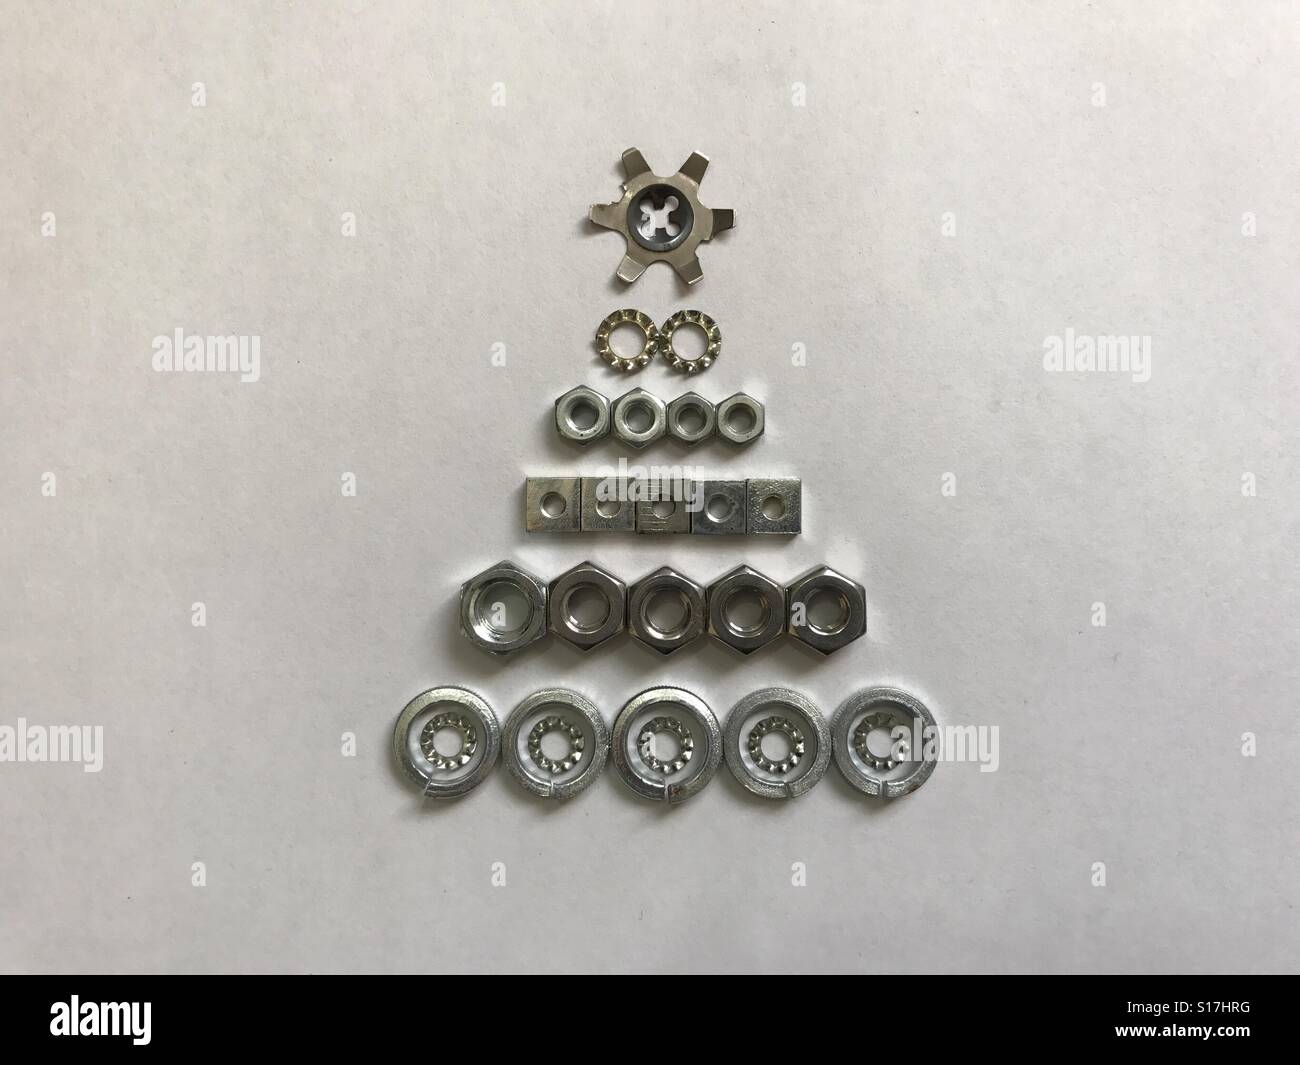 Christmas tree made of nuts and washers Stock Photo